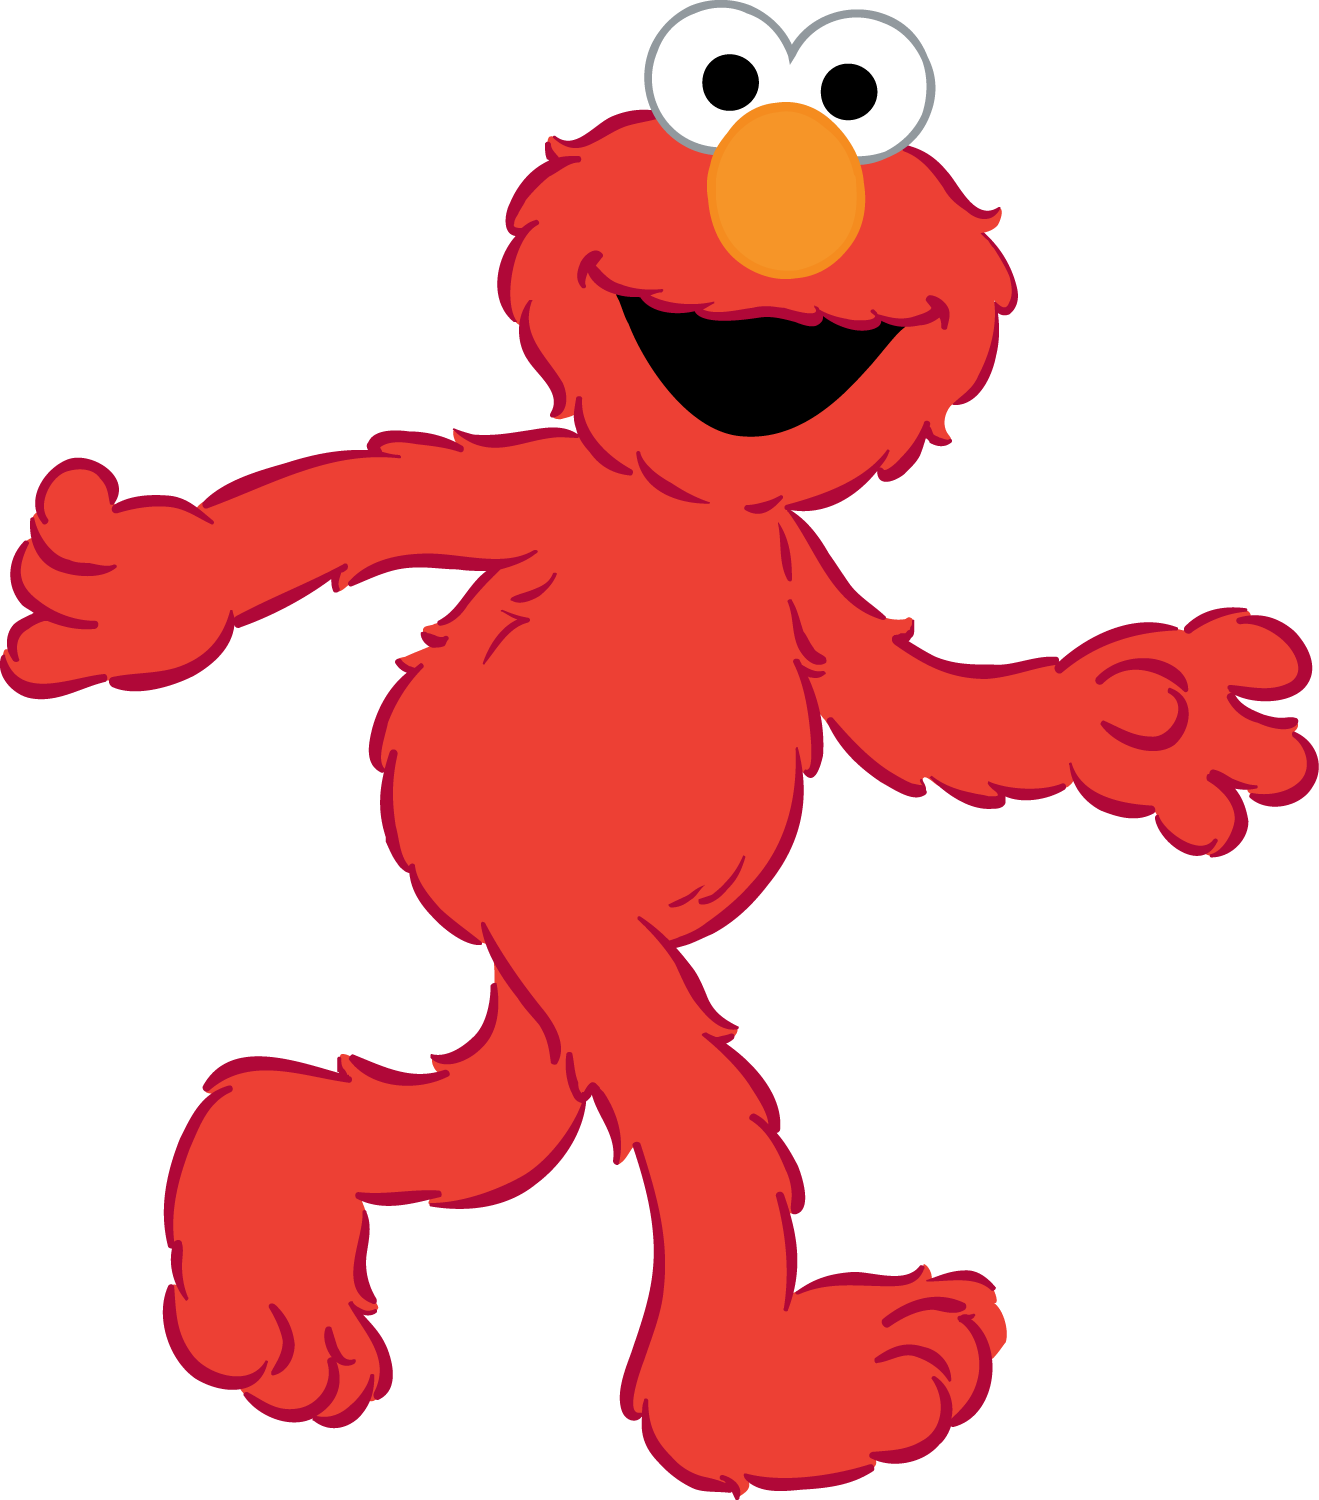 Free Elmo Clipart, Download Free Clip Art, Free Clip Art on.